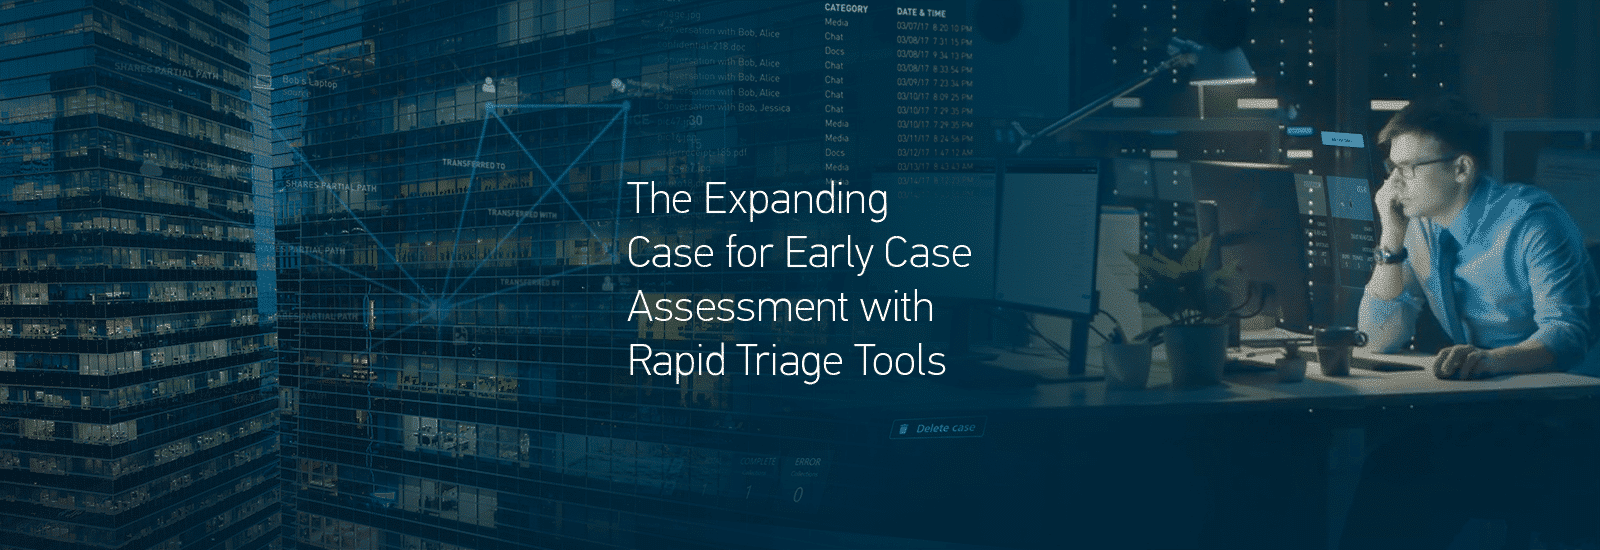 A decorative header for the Case for Early Case Assessment with Rapid Triage Tools